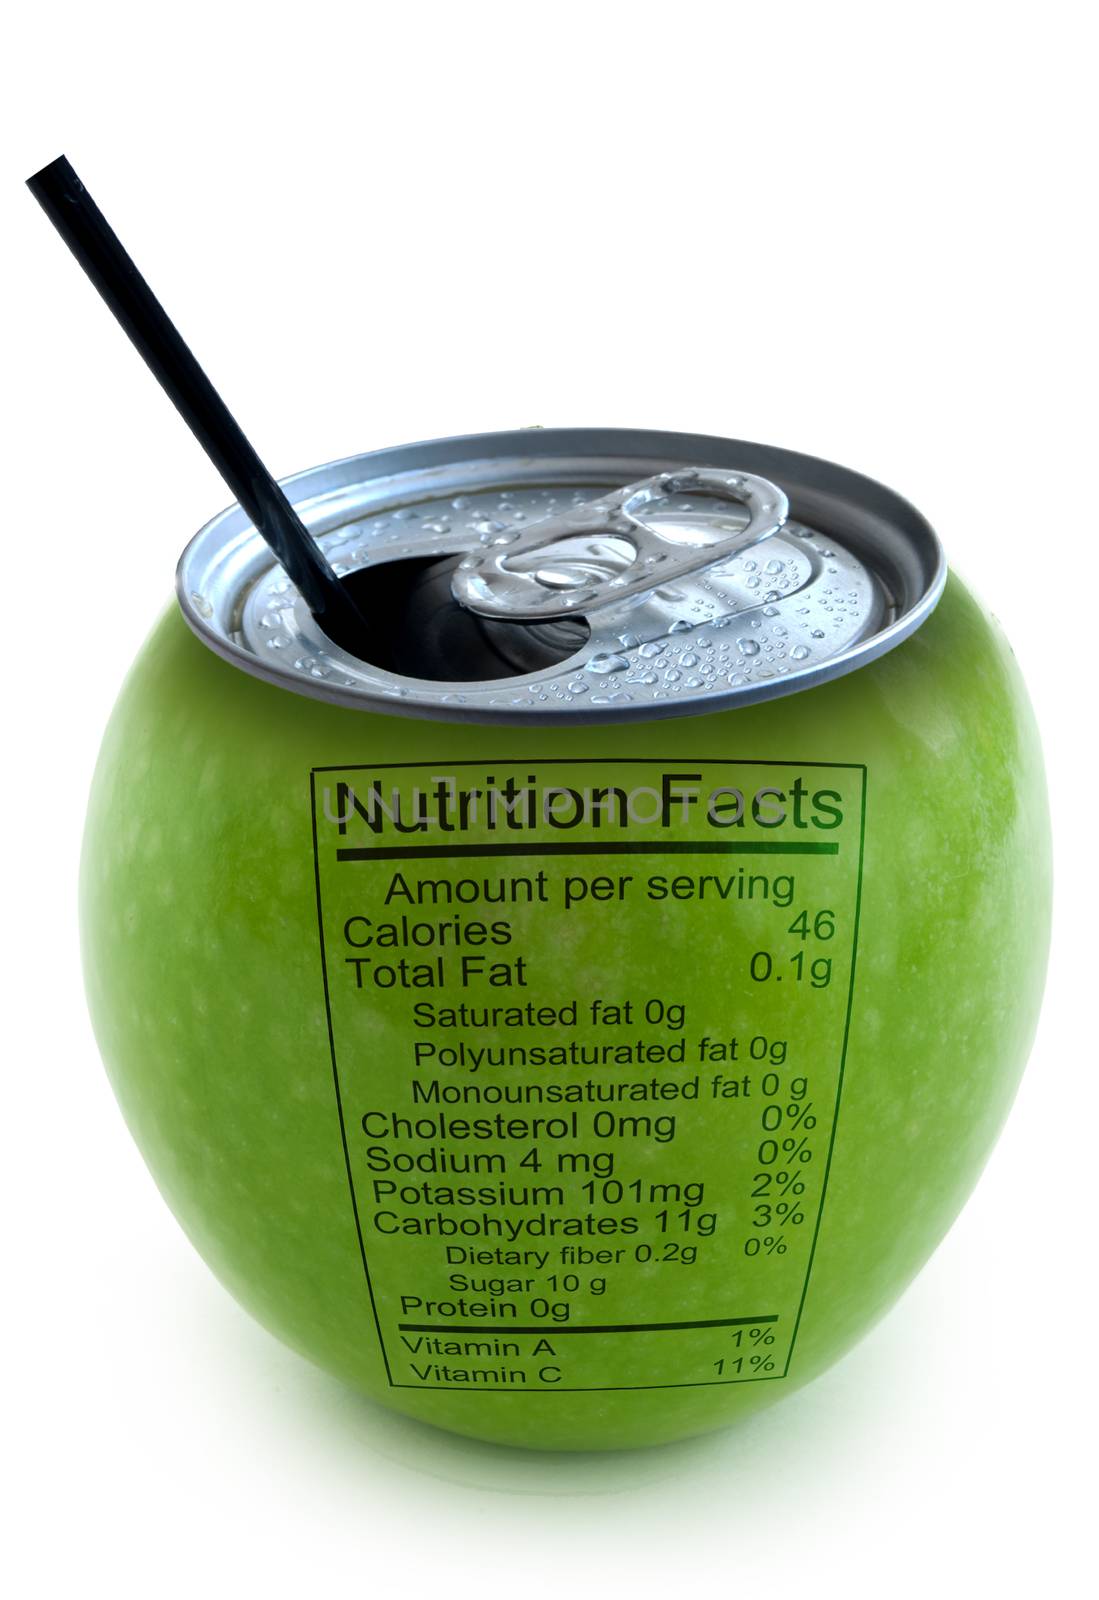 Apple nutrition facts  by unikpix